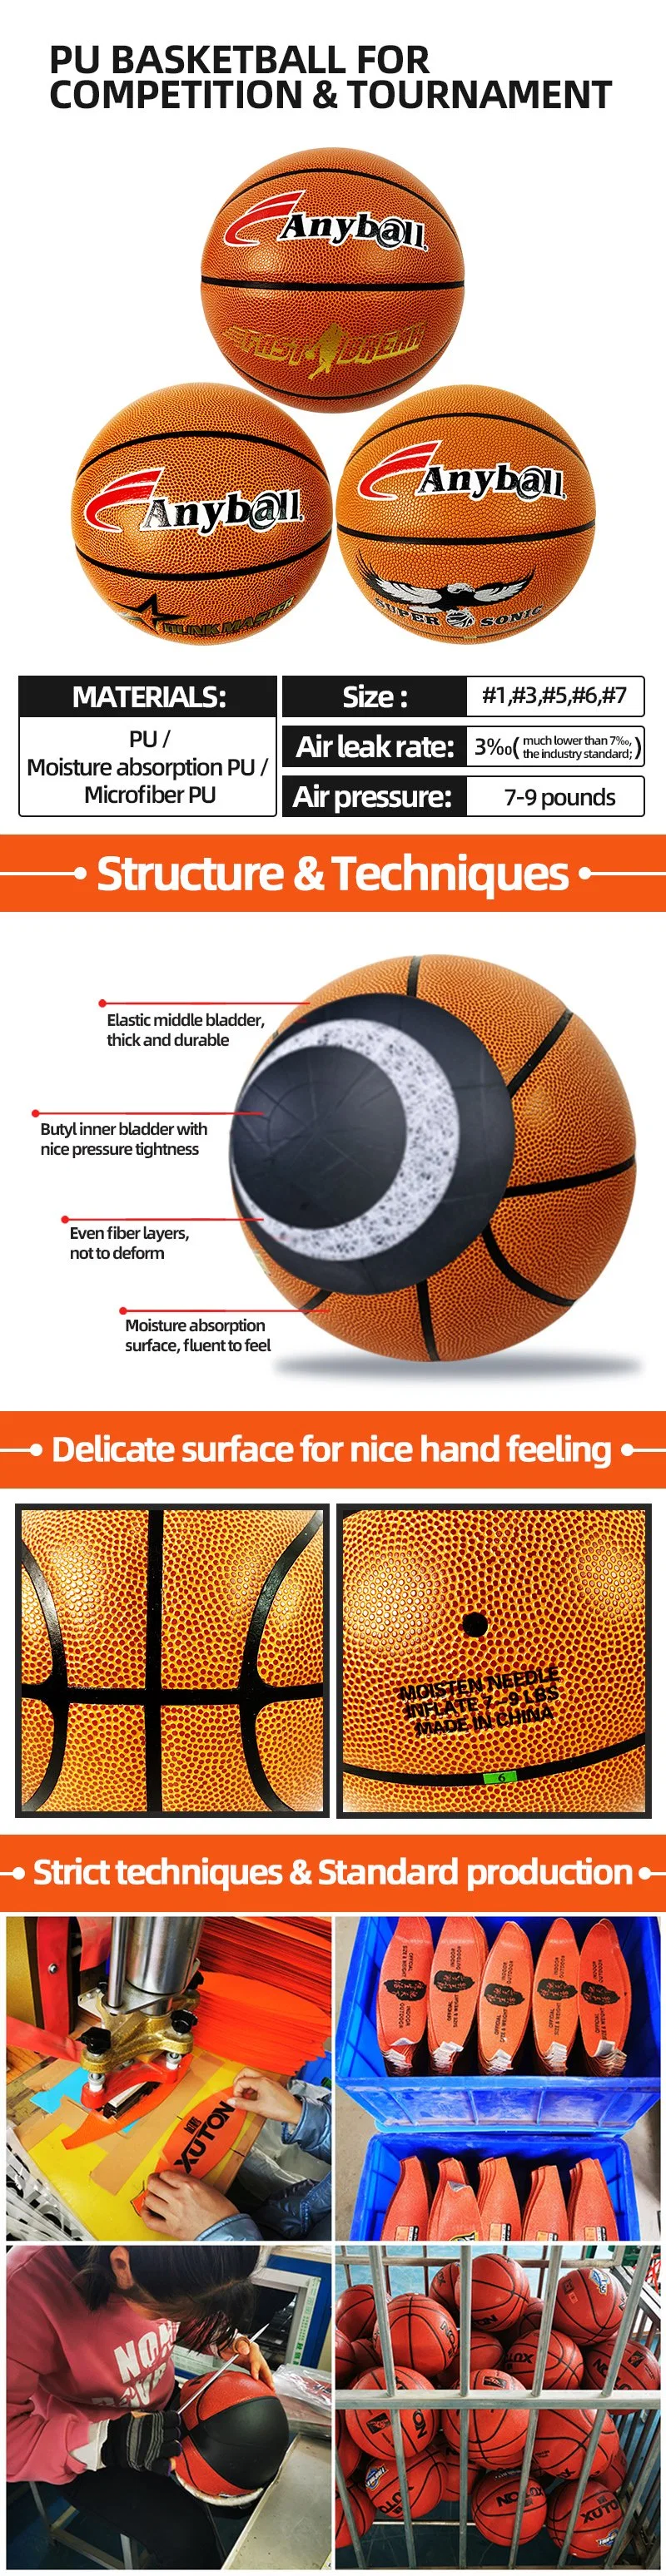 Factory Wholesale Basketball Balls for Tournament PU Material Size 7